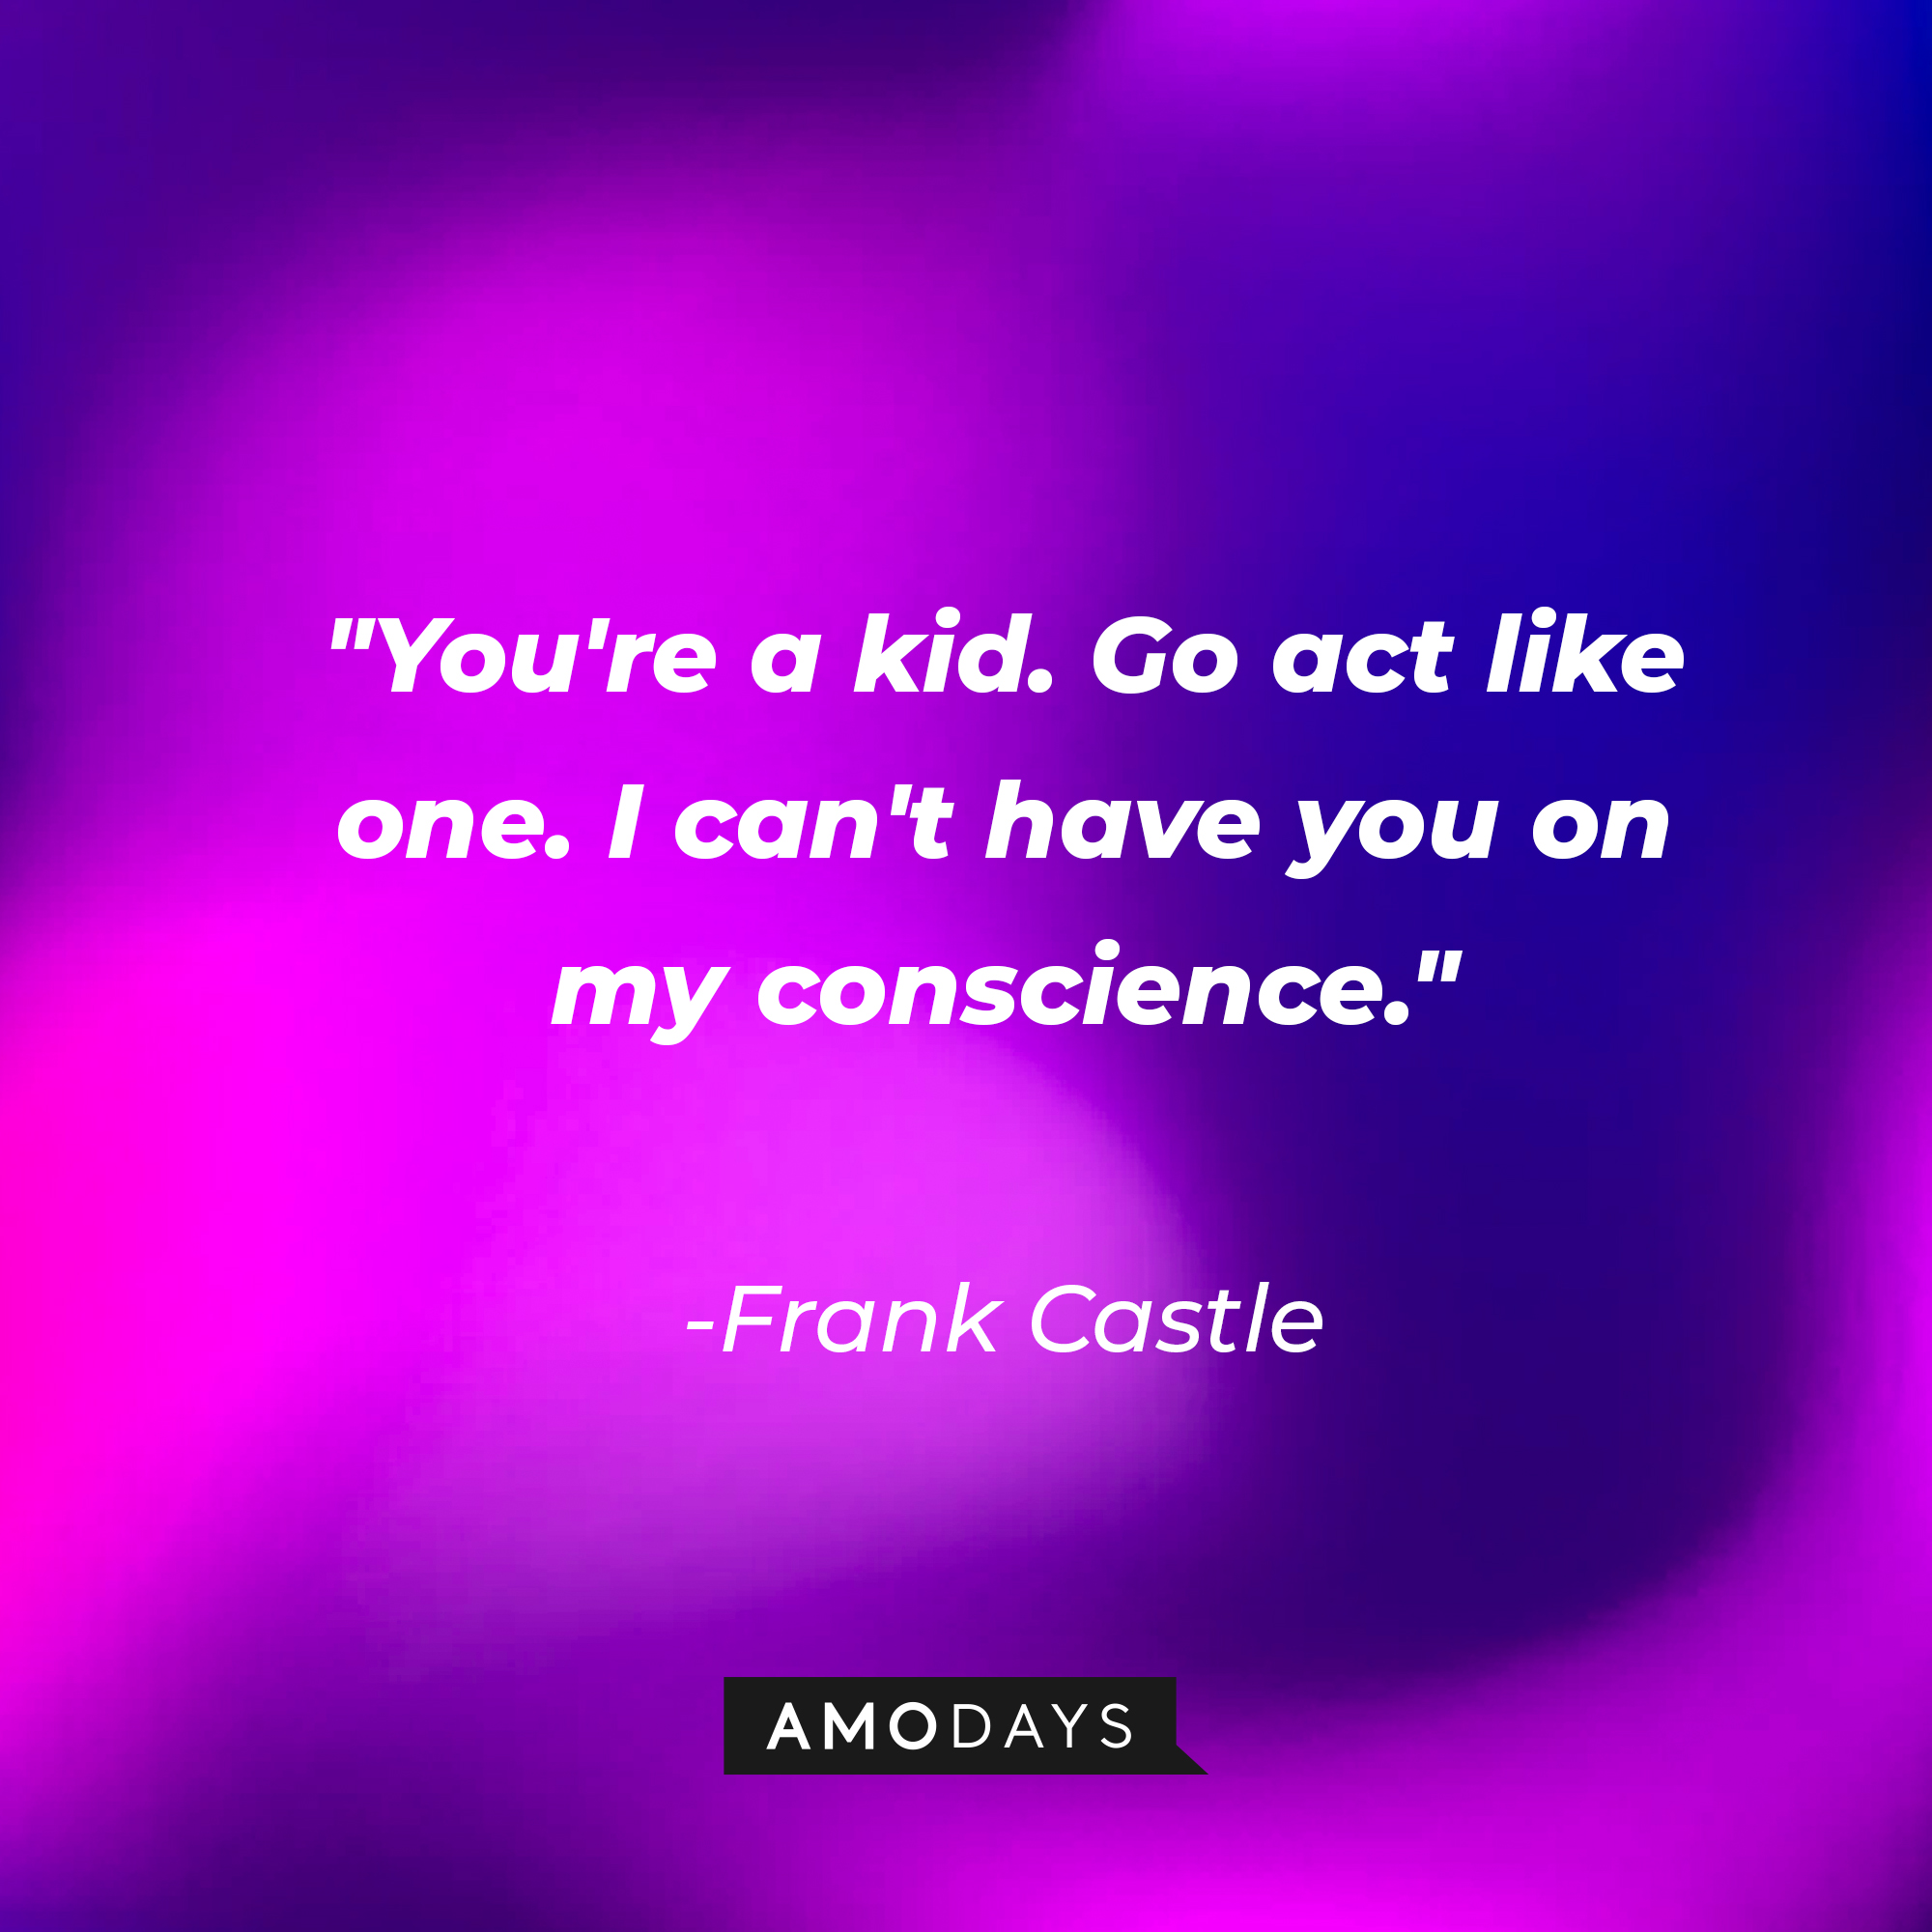 Frank Castle's quote: "You're a kid. Go act like one. I can't have you on my conscience." | Source: AmoDays